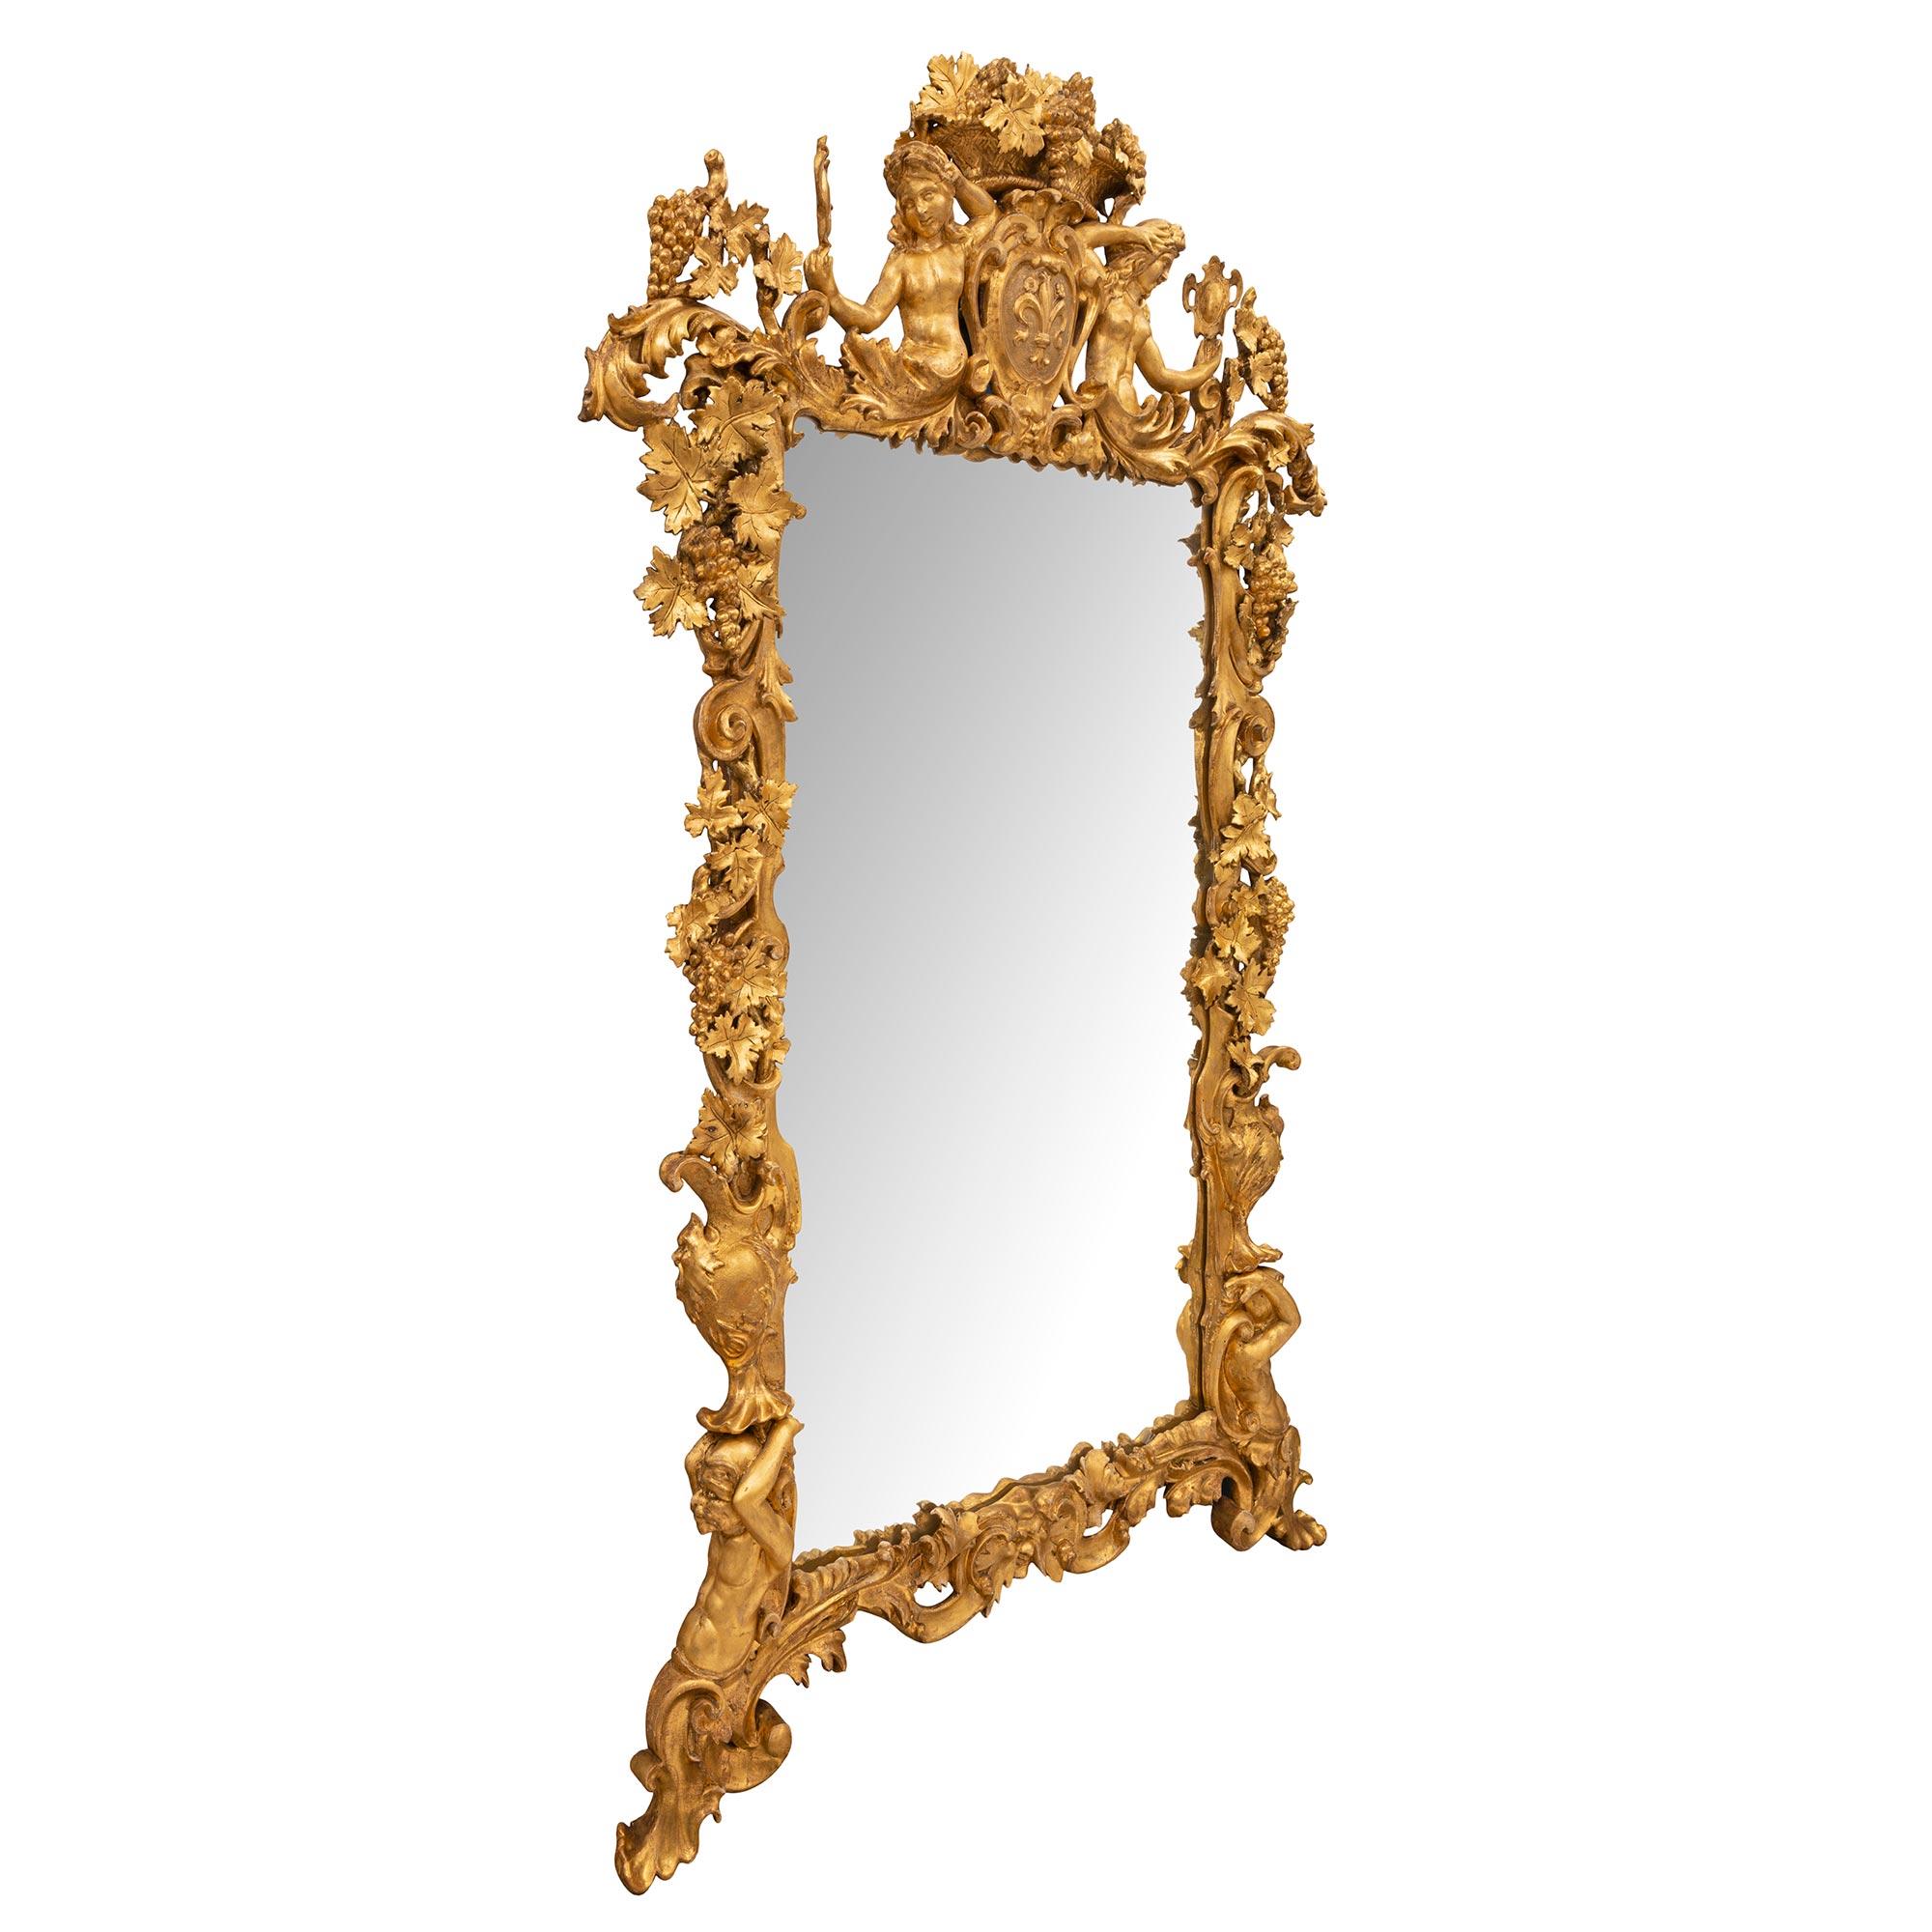 Italian 18th Century Rococo Period Giltwood Mirror In Good Condition For Sale In West Palm Beach, FL